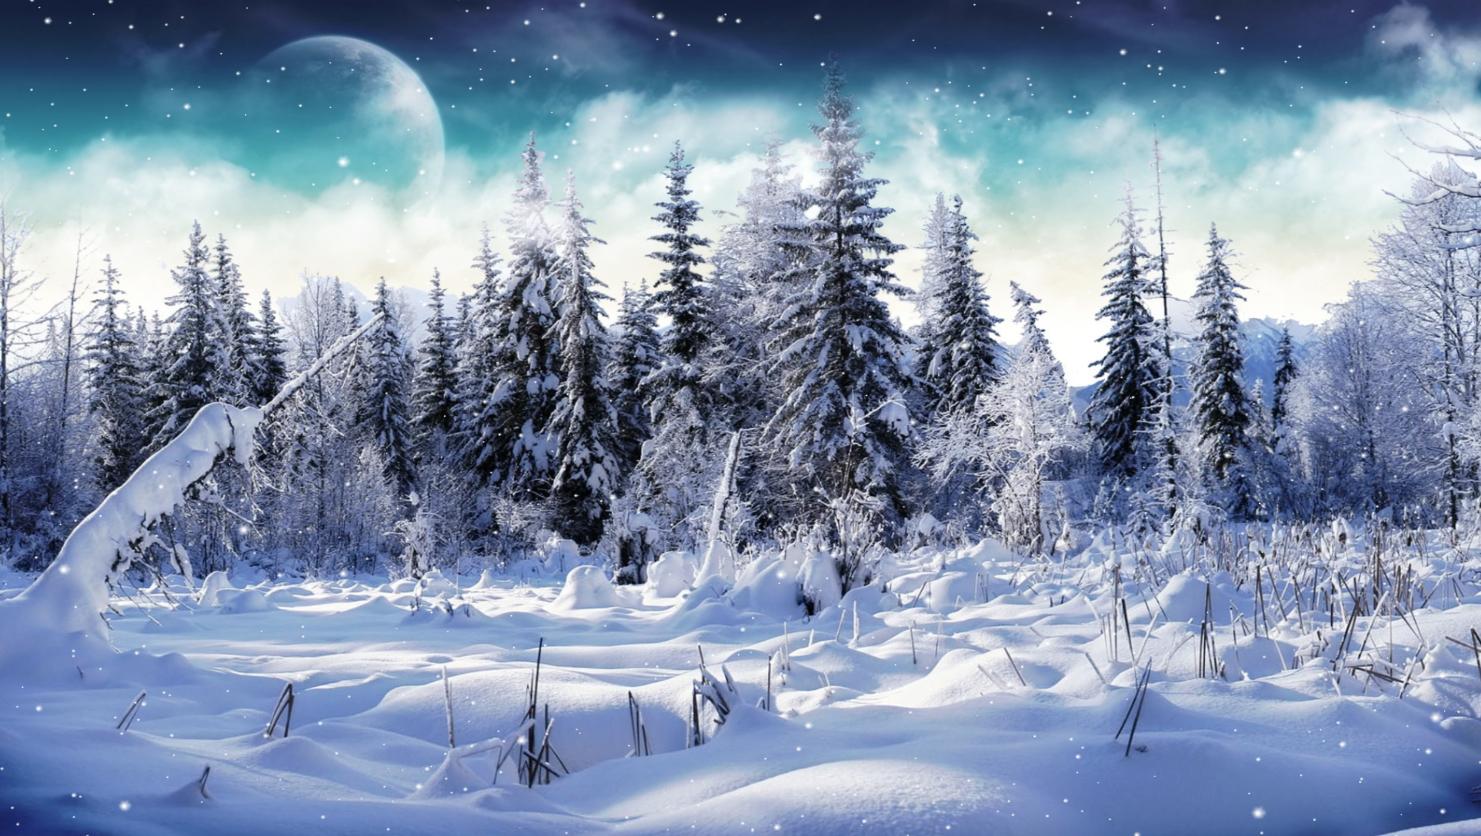 Now Cold Winter Animated Wallpaper Ed Times